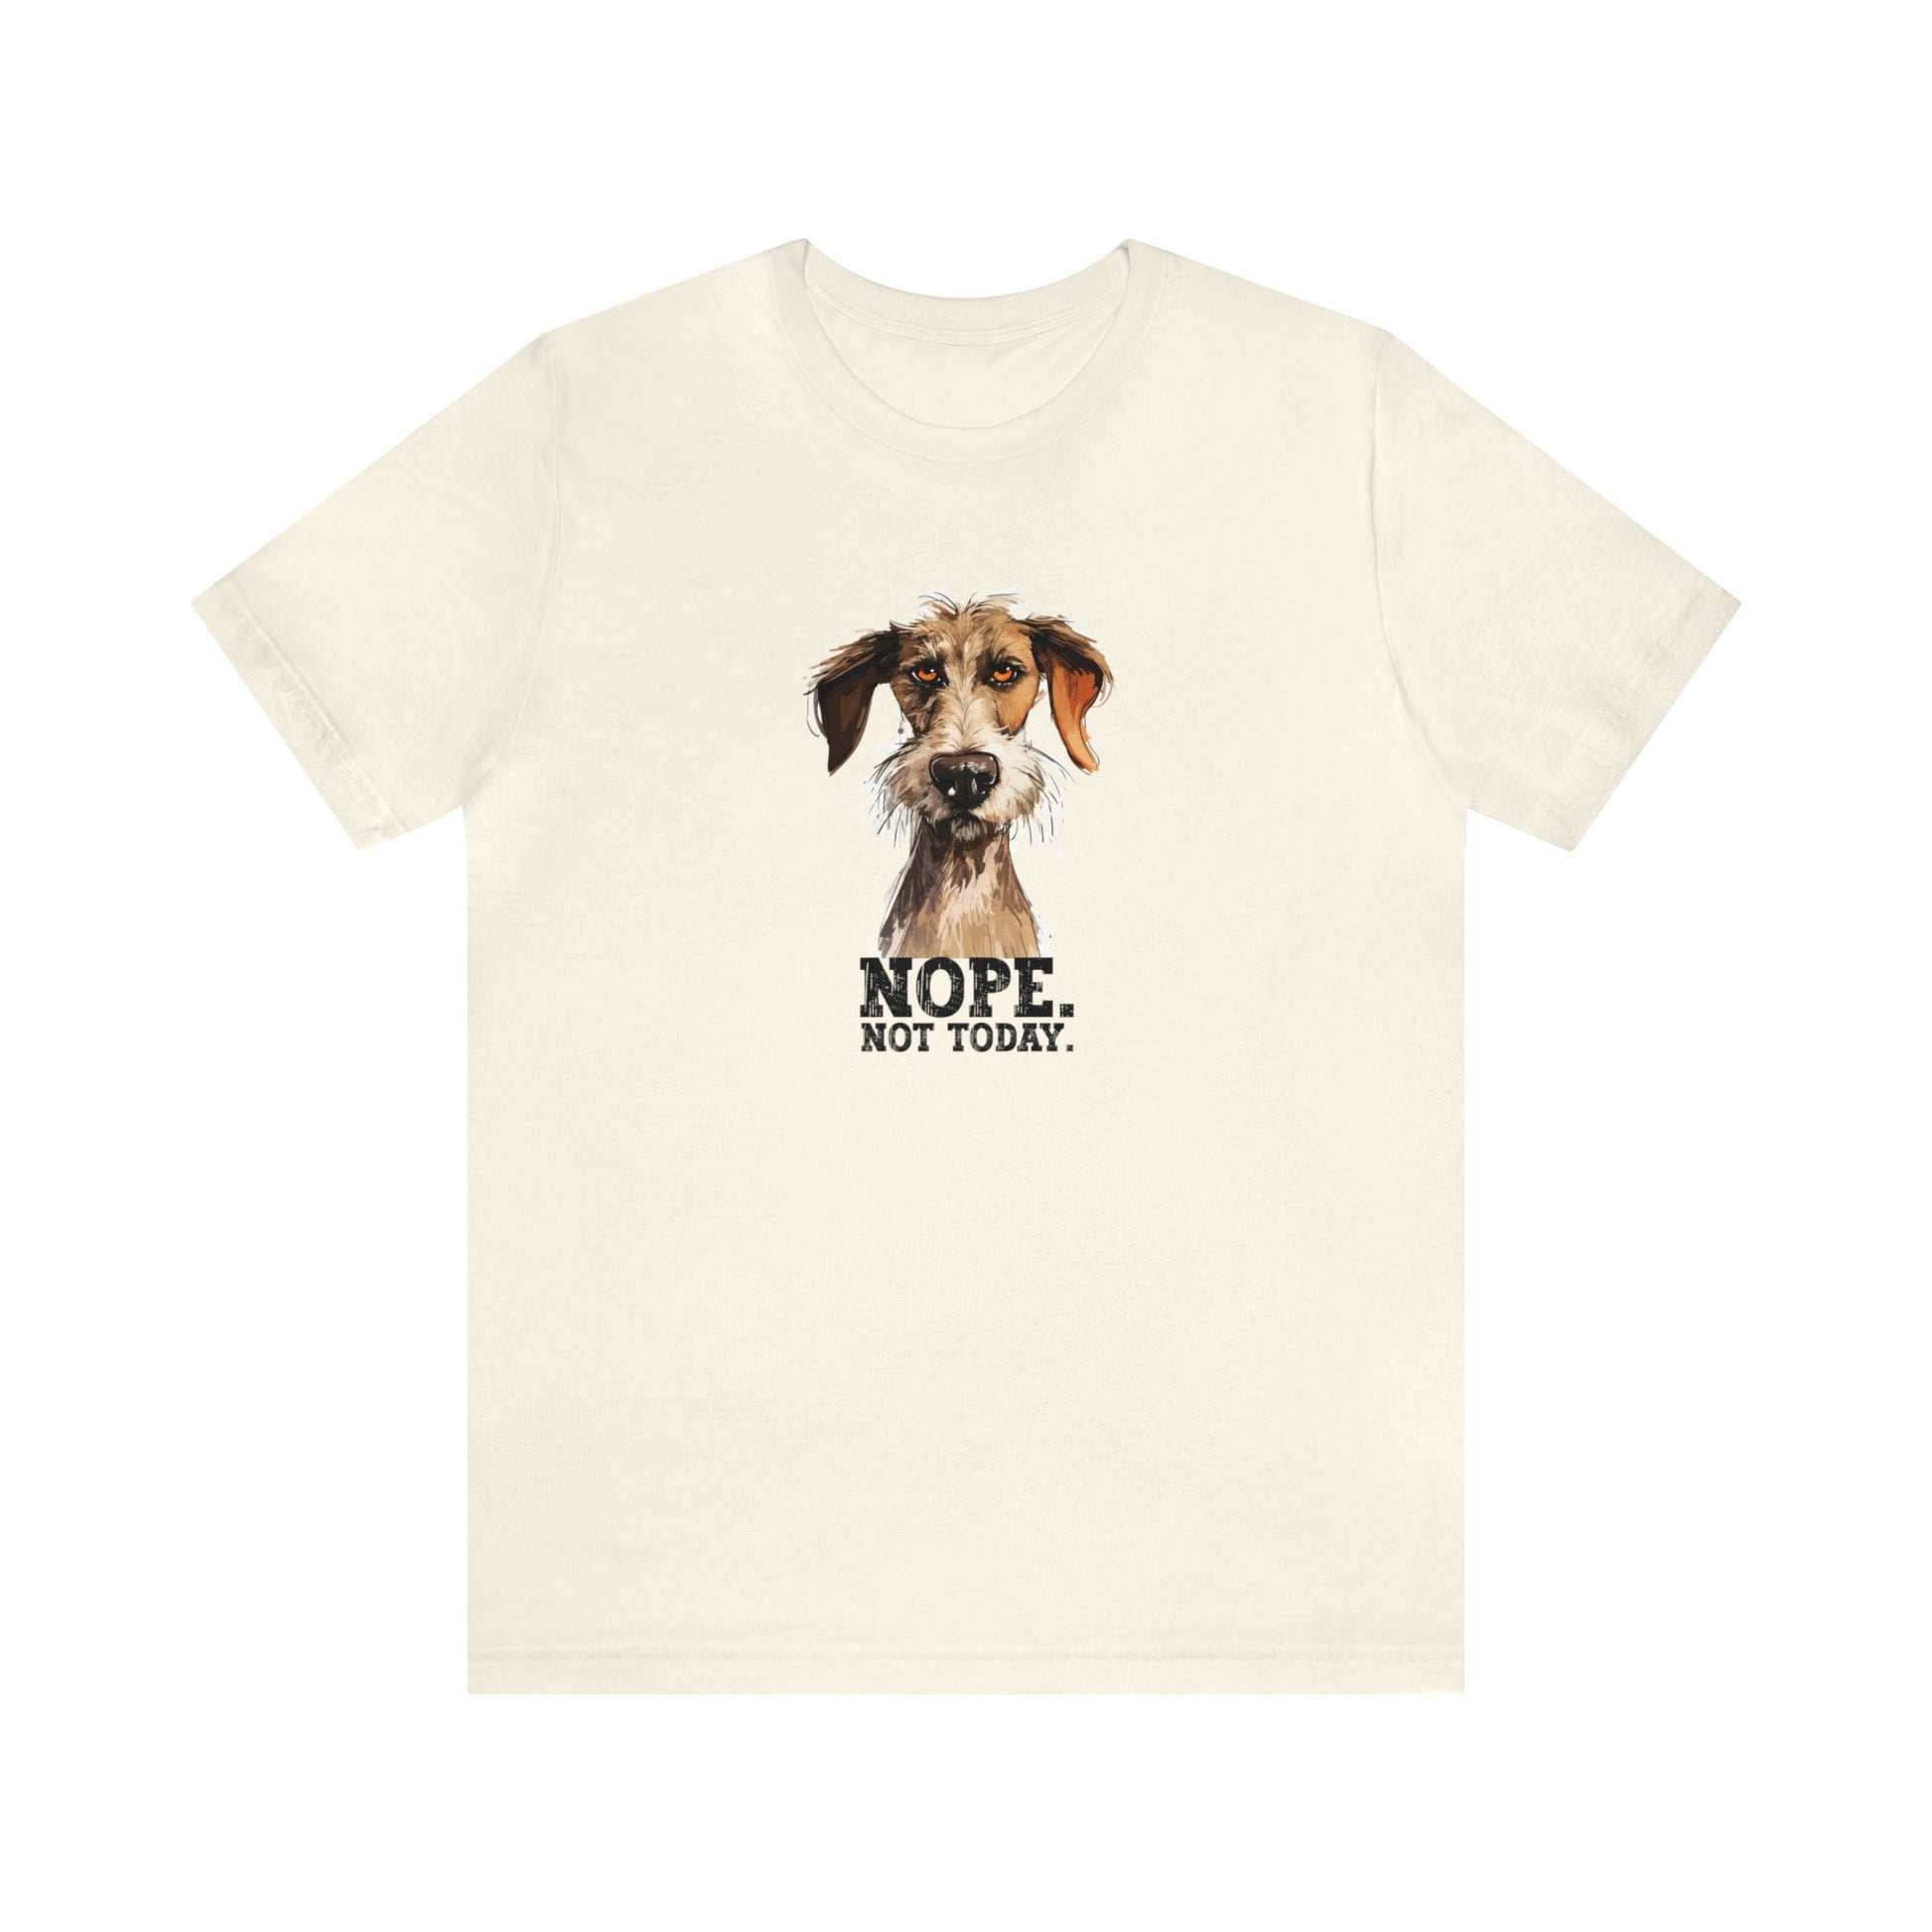 Funny Dog Tshirt - "Nope. Not today" Dog Lovers T-shirt, Funny Cartoon T-shirt, Gift for Mom Dad, Dog Lover Gift, Happy Puppies, Dog Gift - FlooredByArt